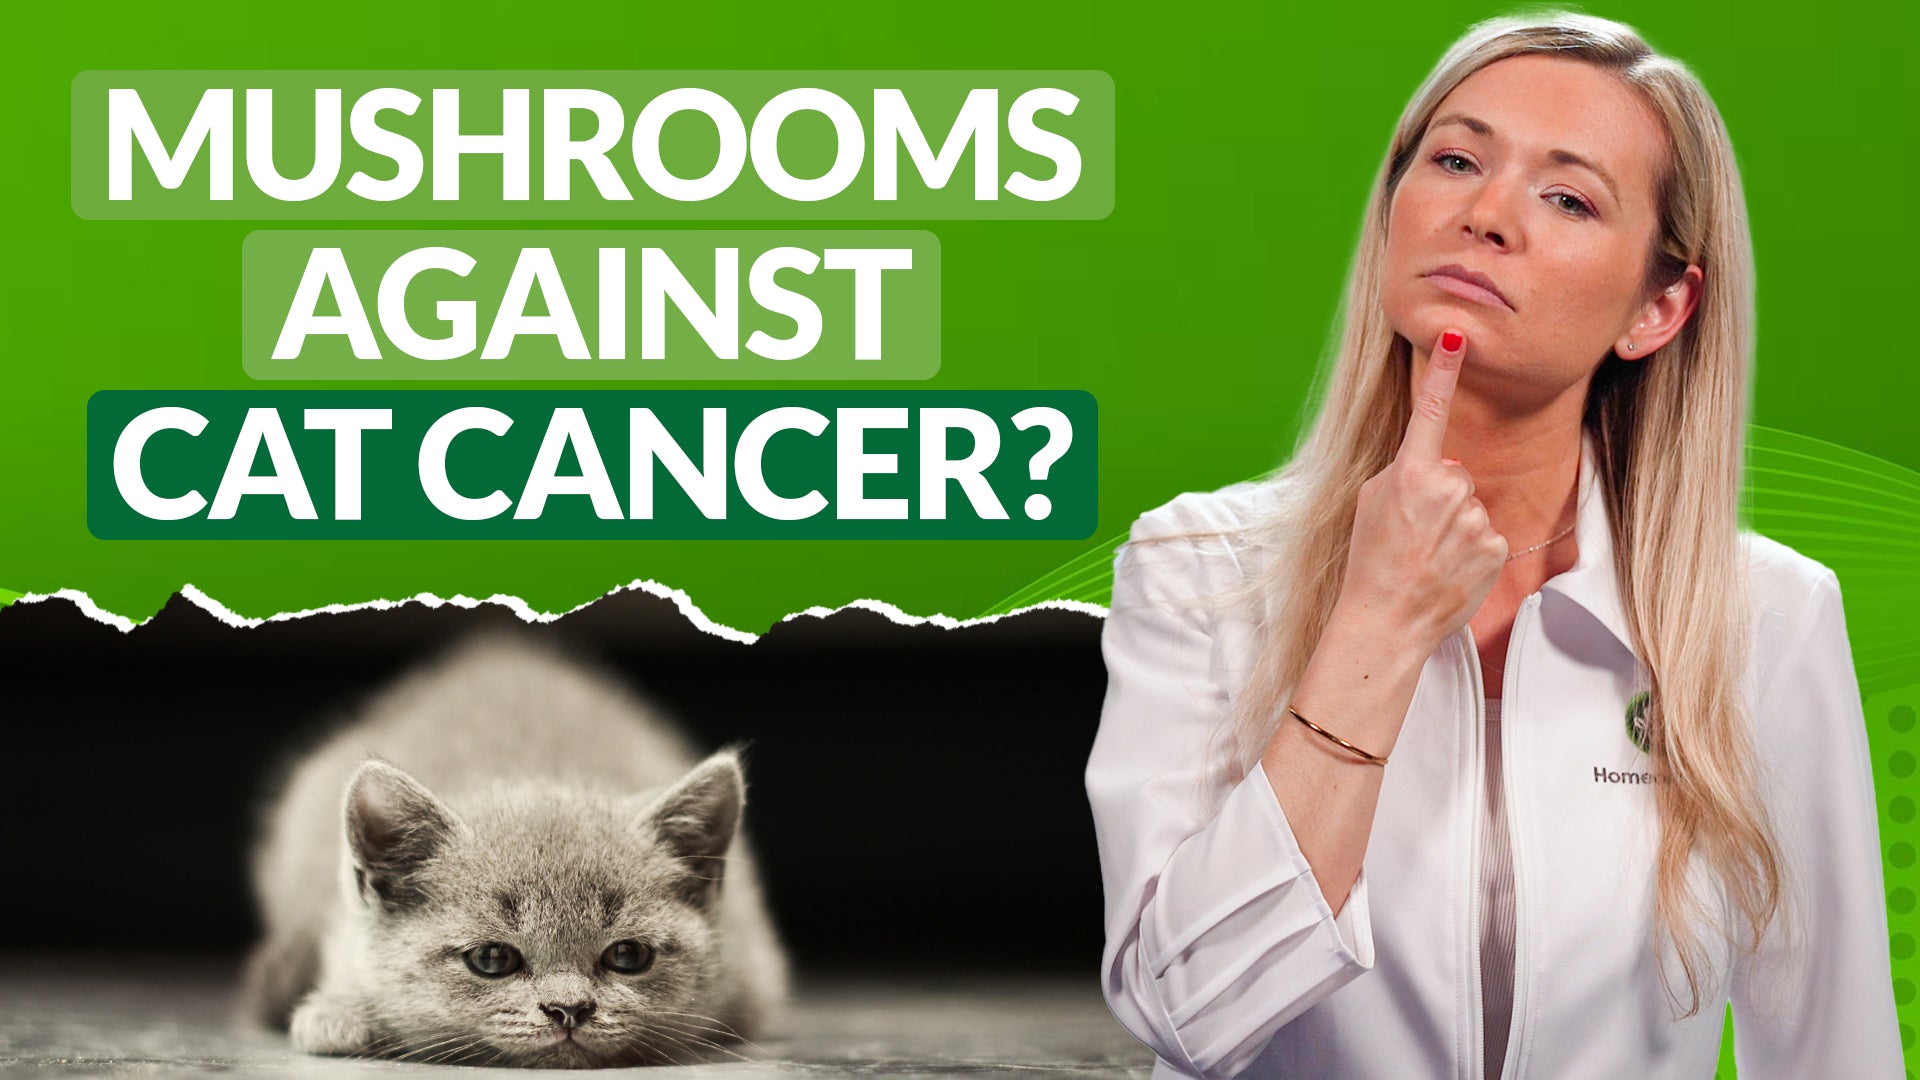 Science Experts Recommend These NATURAL Cat Cancer Remedies